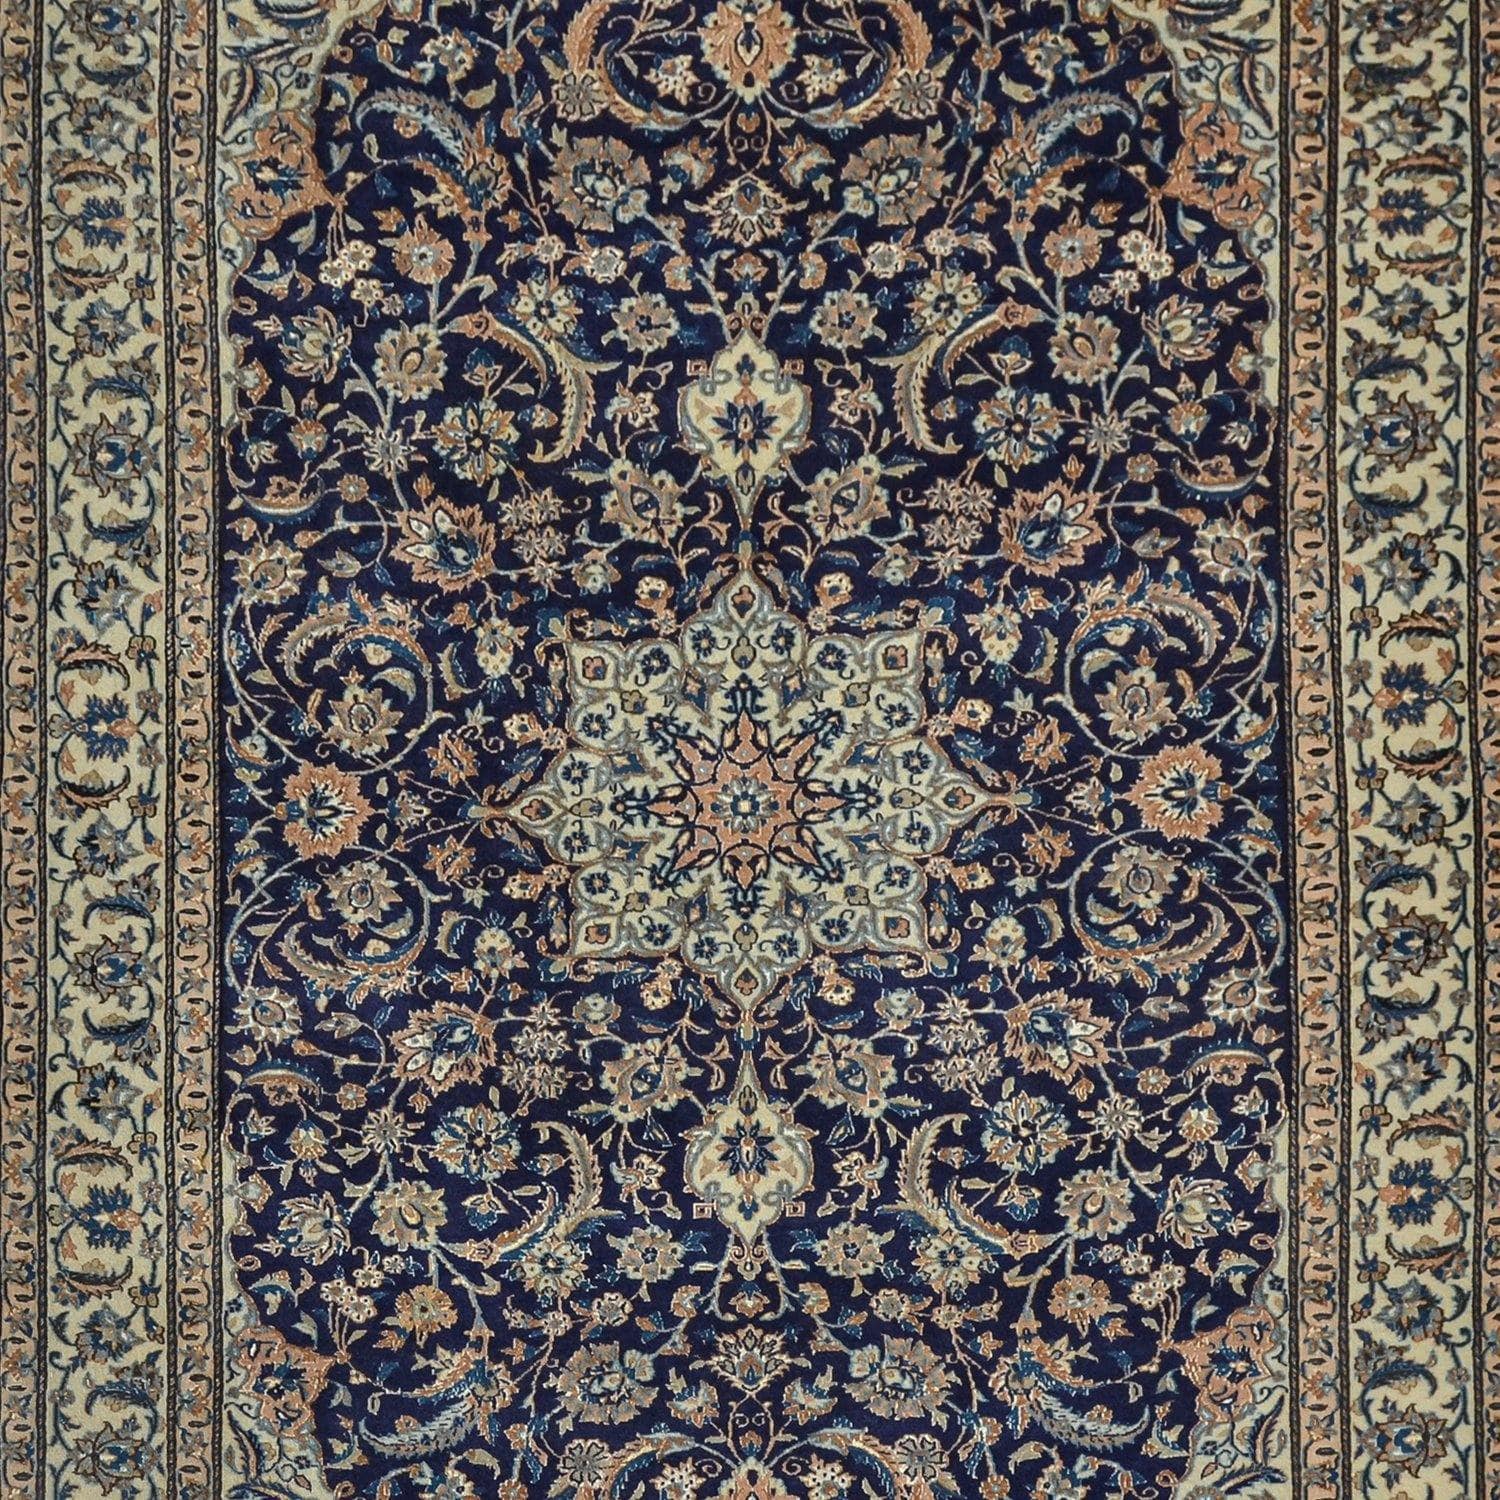 Super Fine Hand-knotted Vintage Persian Wool & Silk Nain Rug 164cm x 254cm